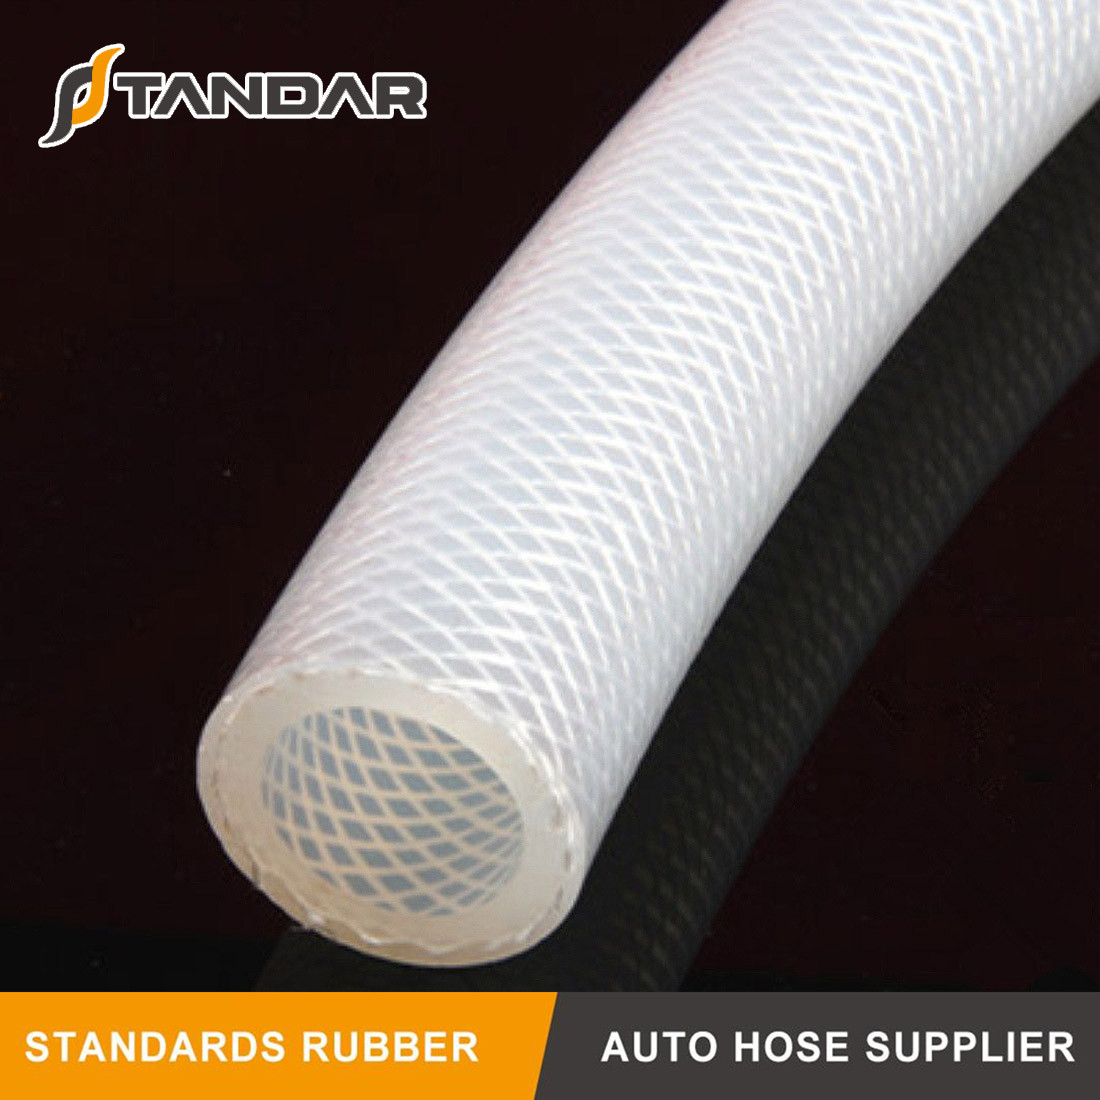 Food grade silicone hose is resistant to temperature and cleaning problems